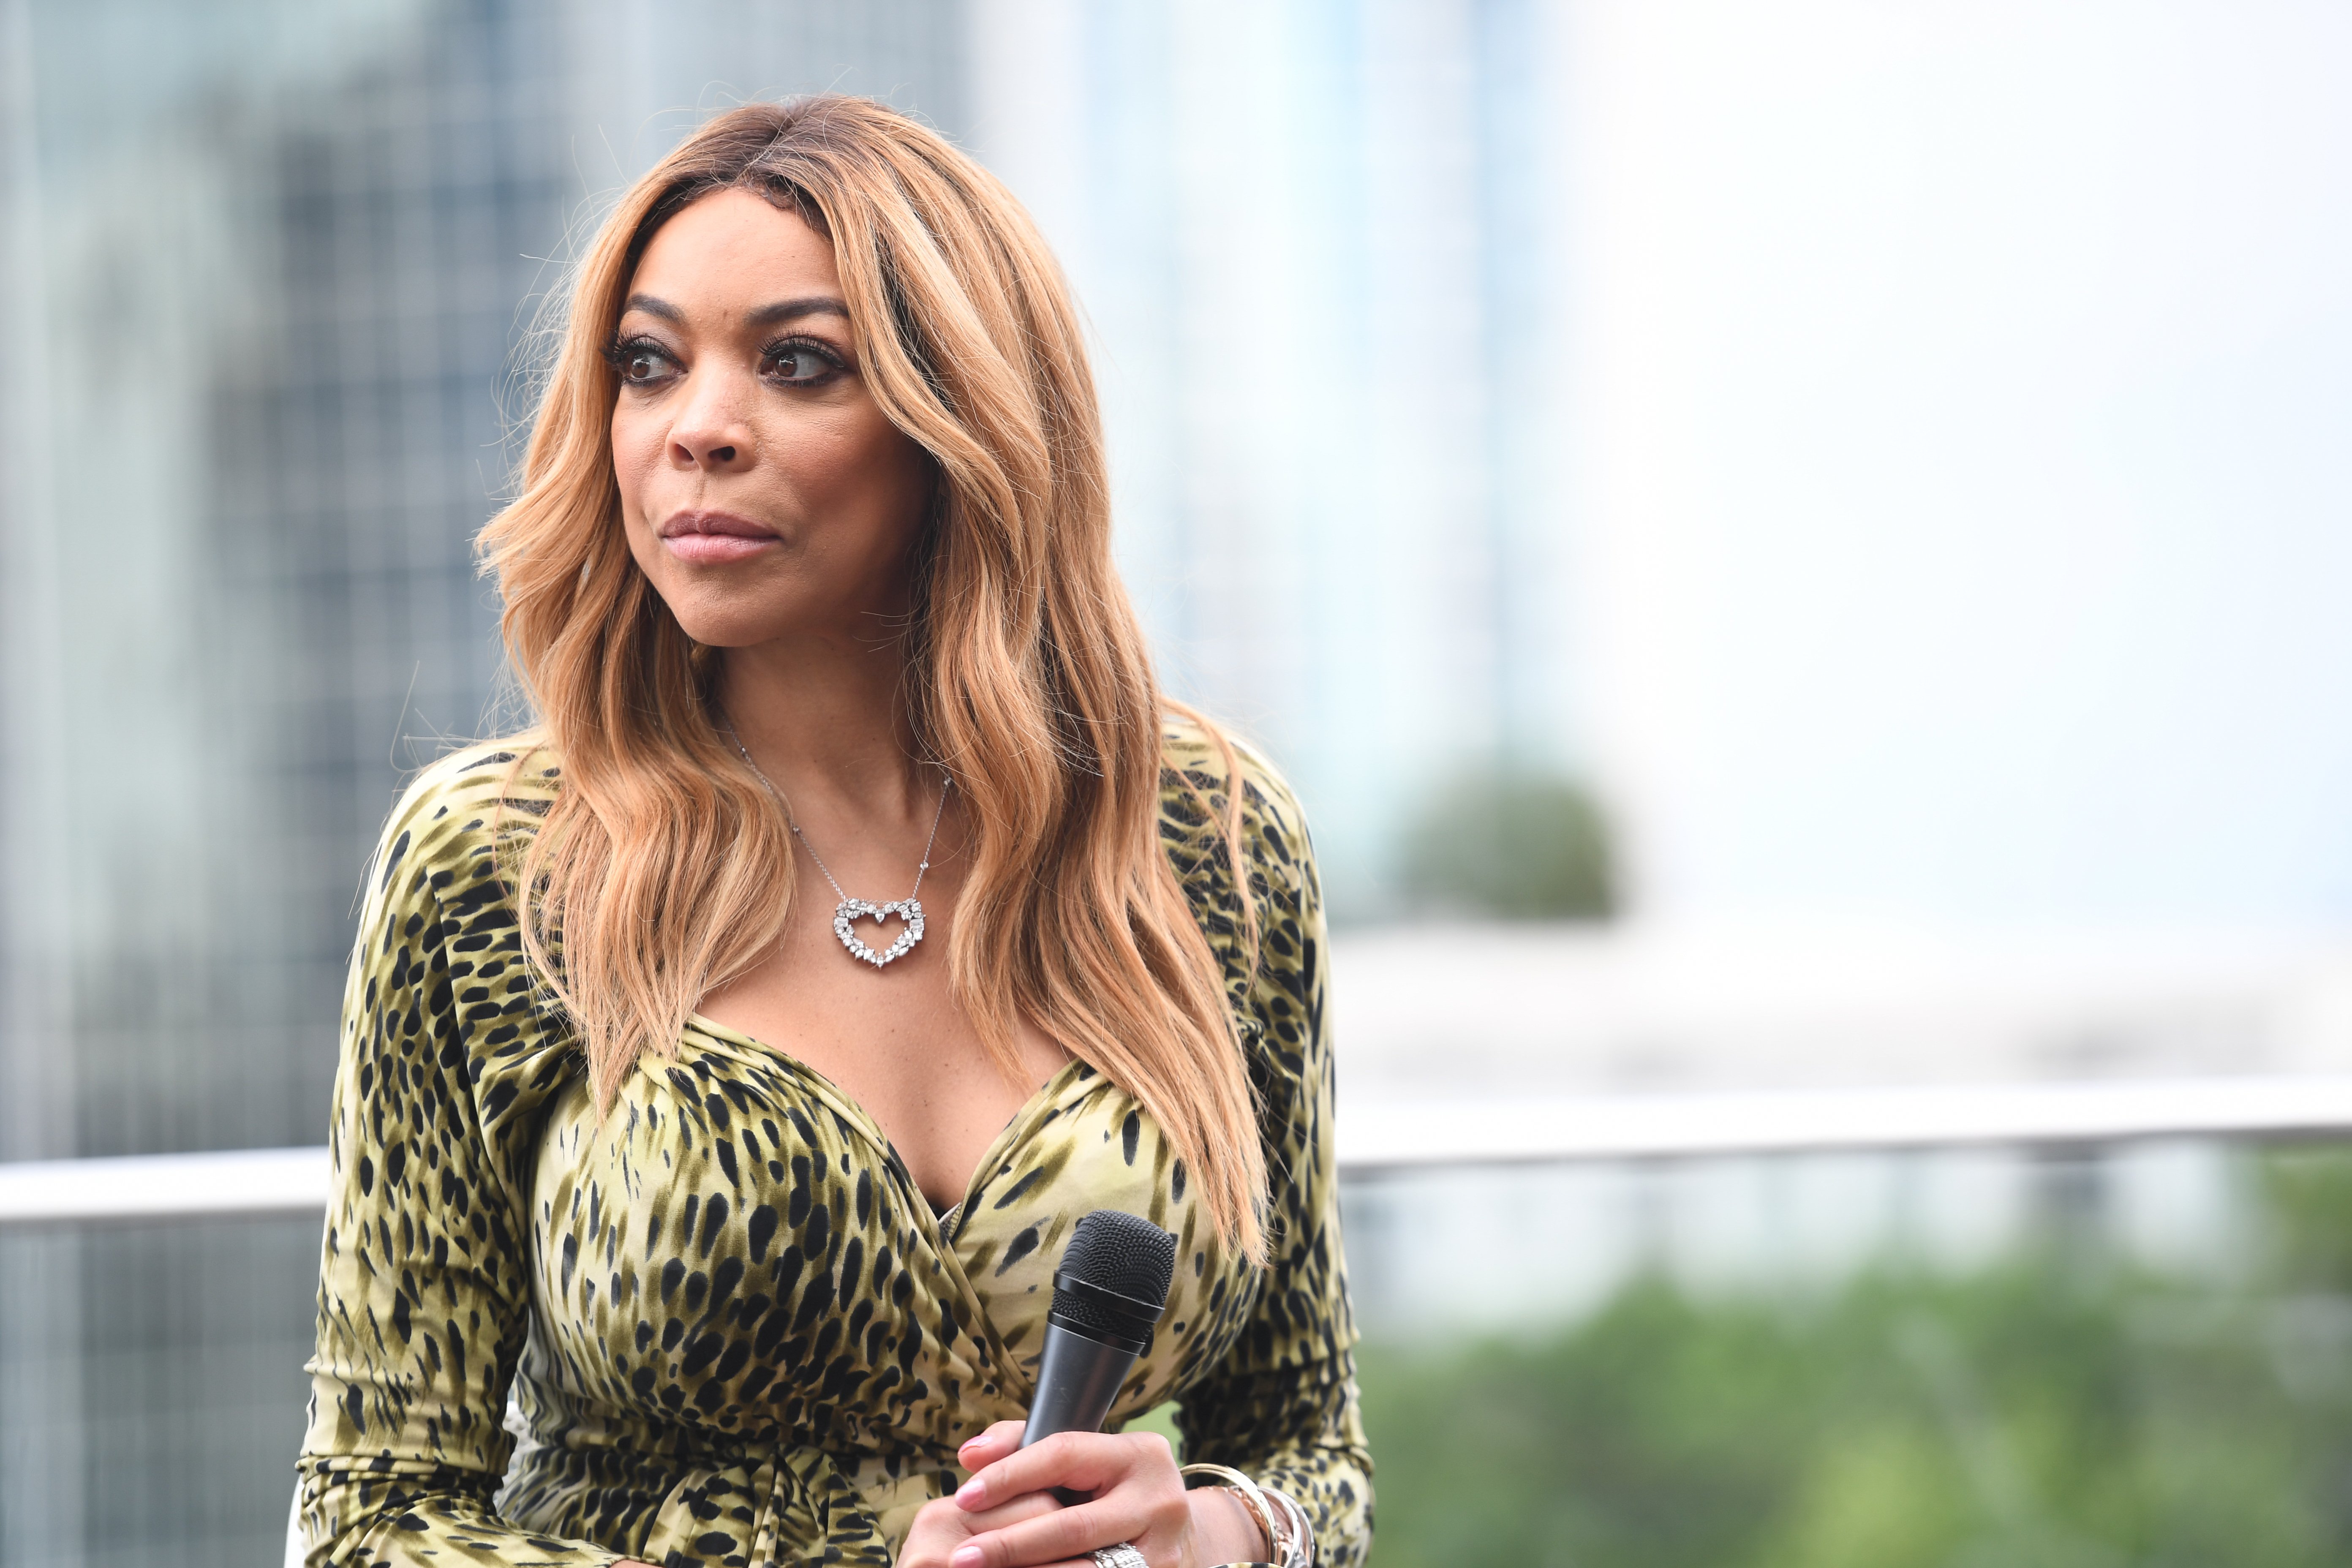 Wendy Williams attends Wendy Digital Event at Atlanta Tech Village Rooftop on Aug. 29, 2017. | Photo: Getty Images